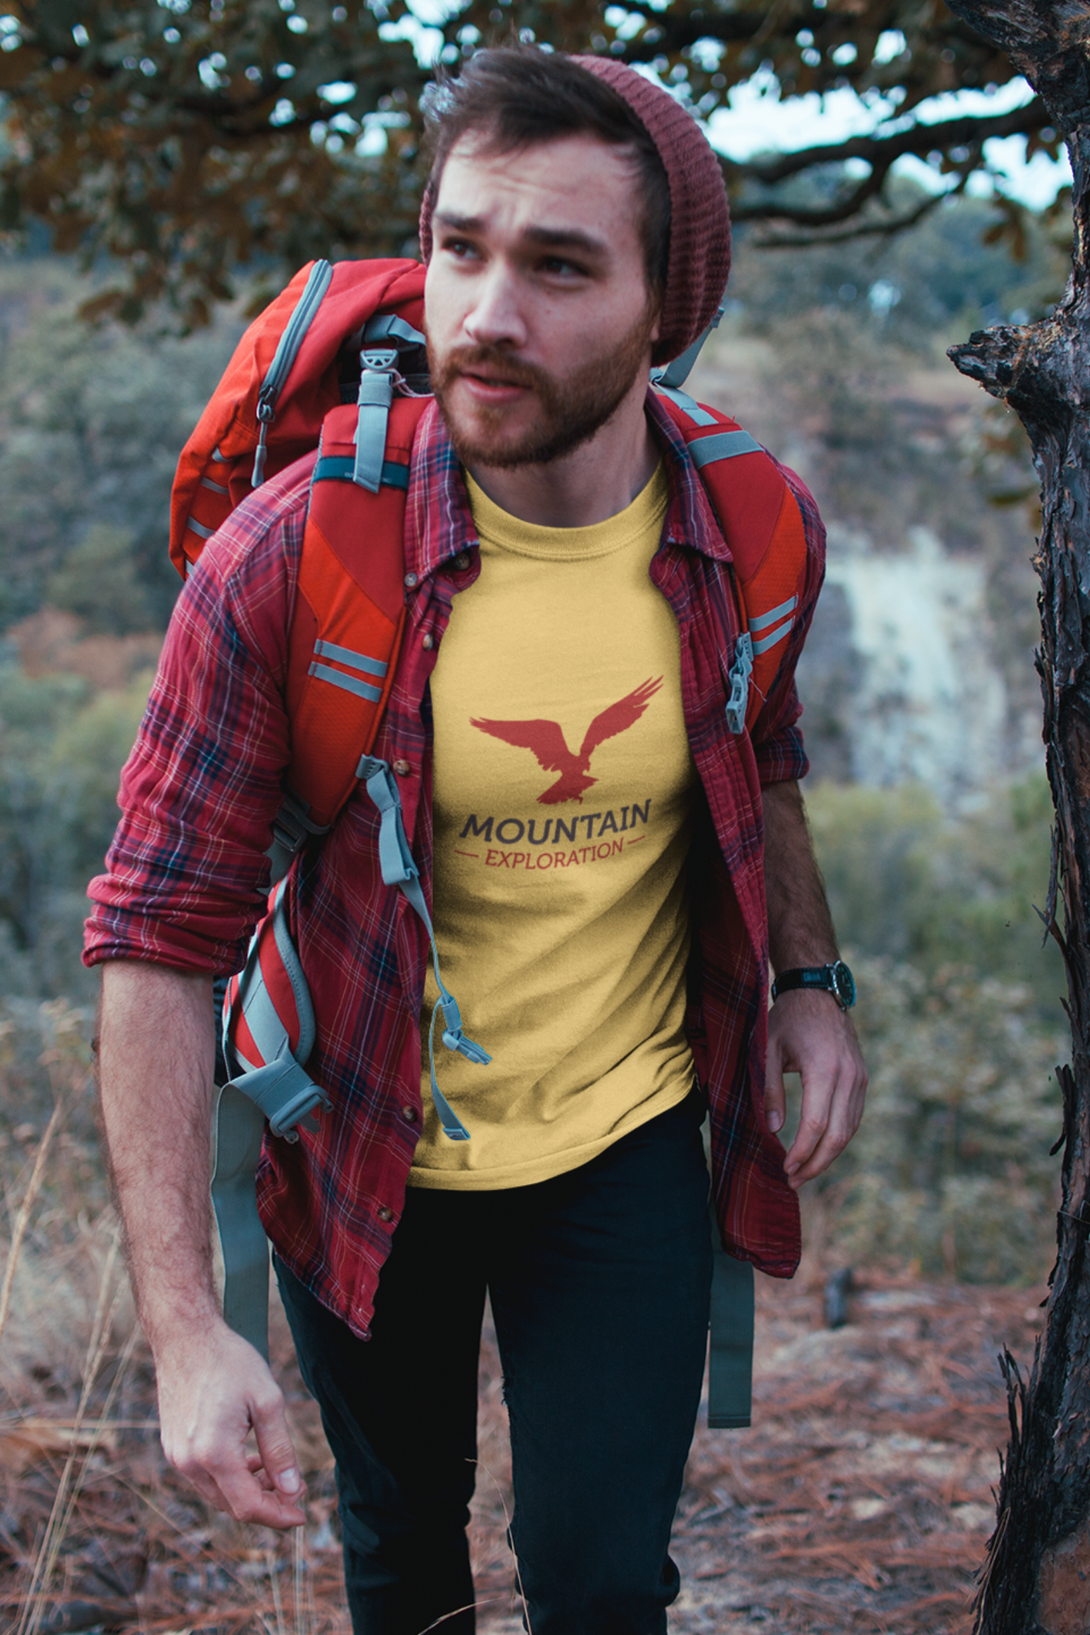 Mountain Exploration Printed T-Shirt For Men - WowWaves - 5